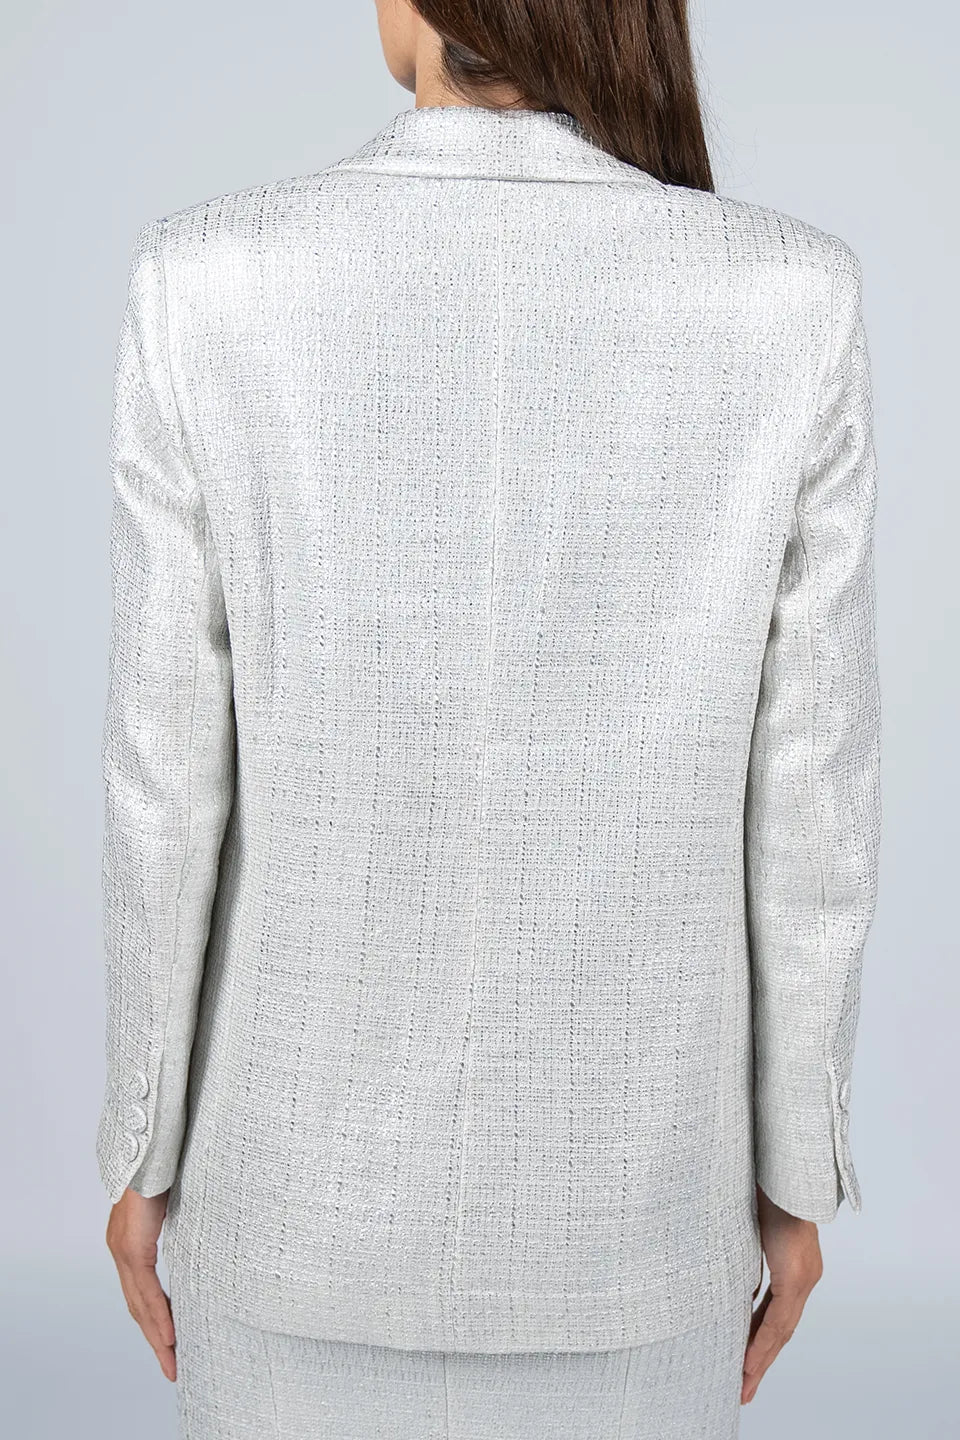 Designer Silver Women blazers, Jacket, shop online with free delivery in UAE. Product gallery 5